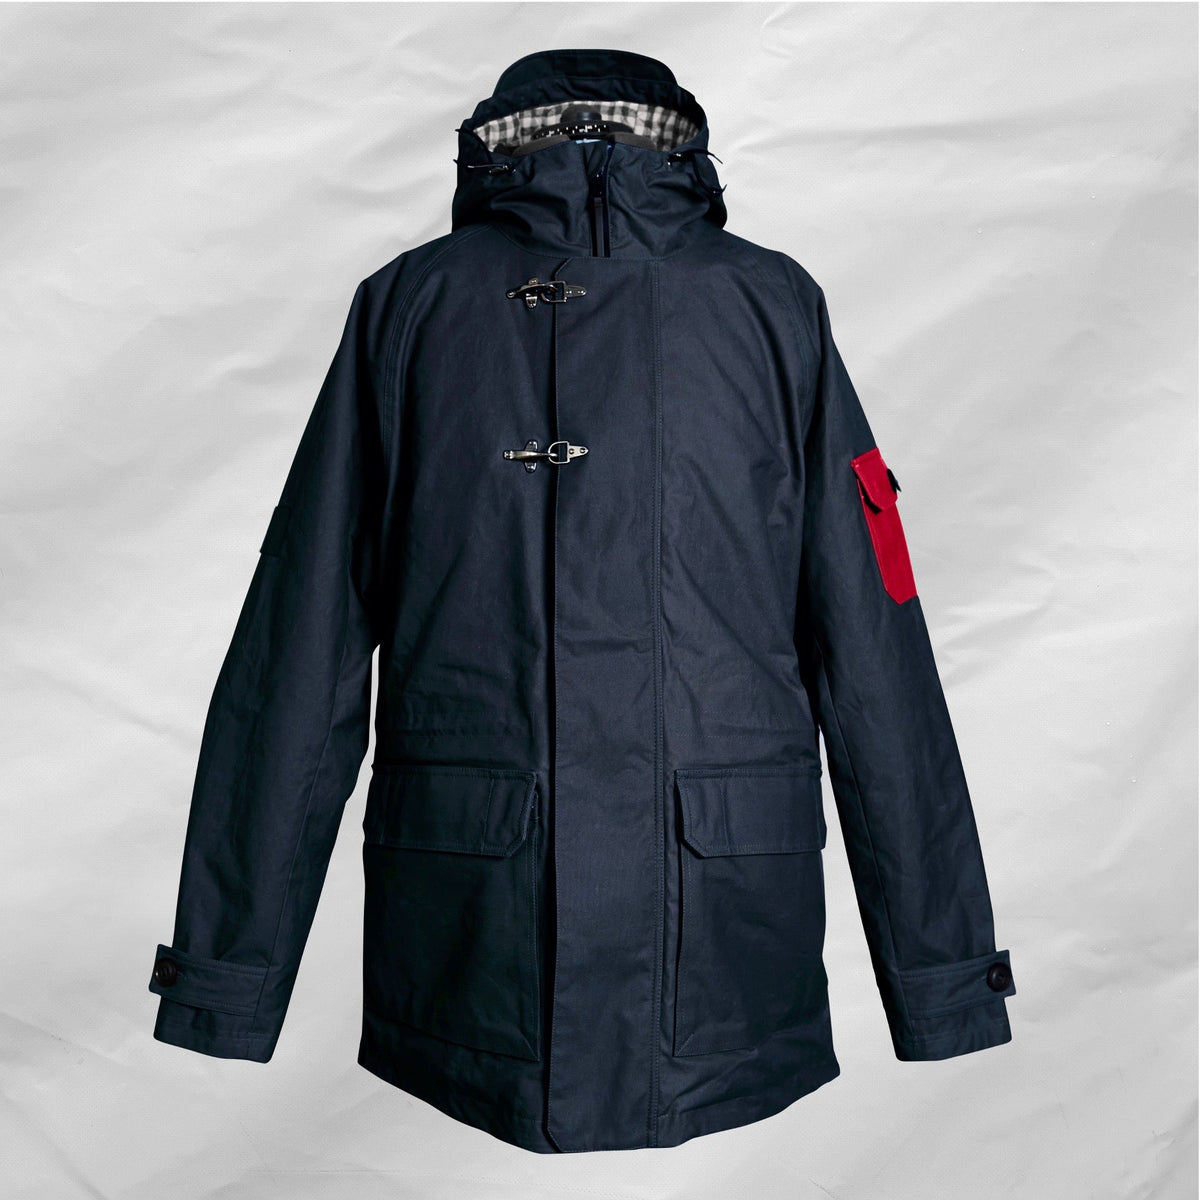 FRAHM Jacket Jacket S / Regular / Classic Navy with Red Thermal Military Parka